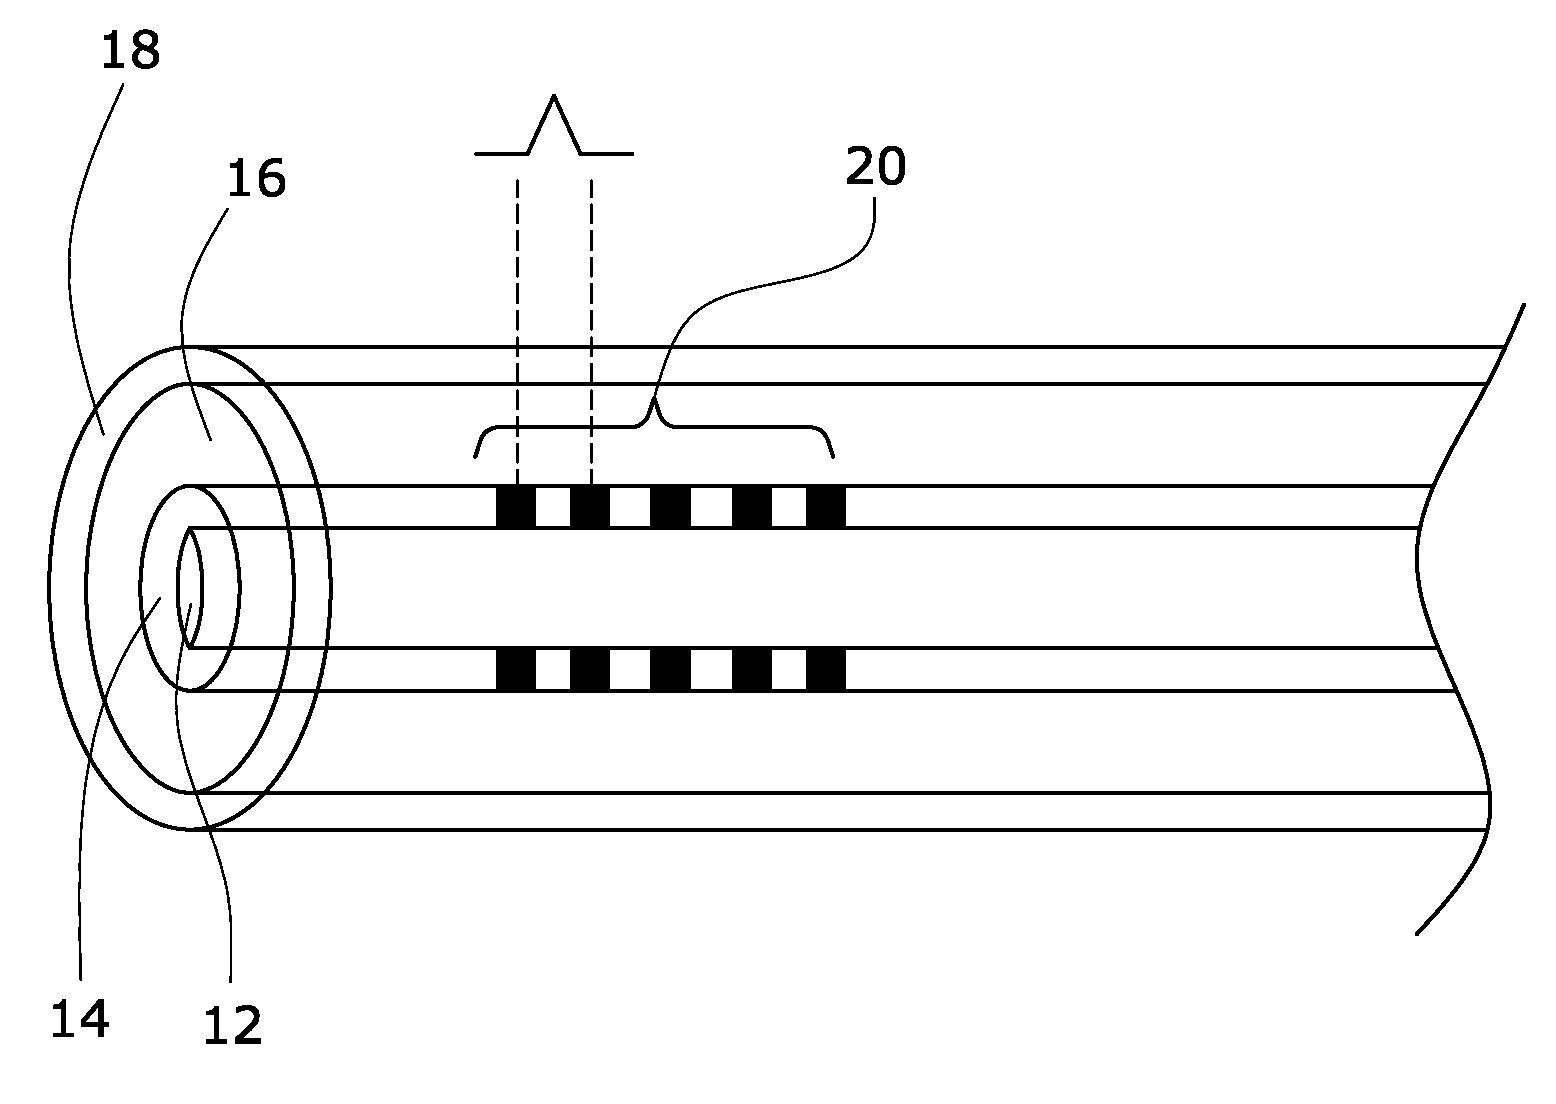 Optical fiber with tin doped core-cladding interface